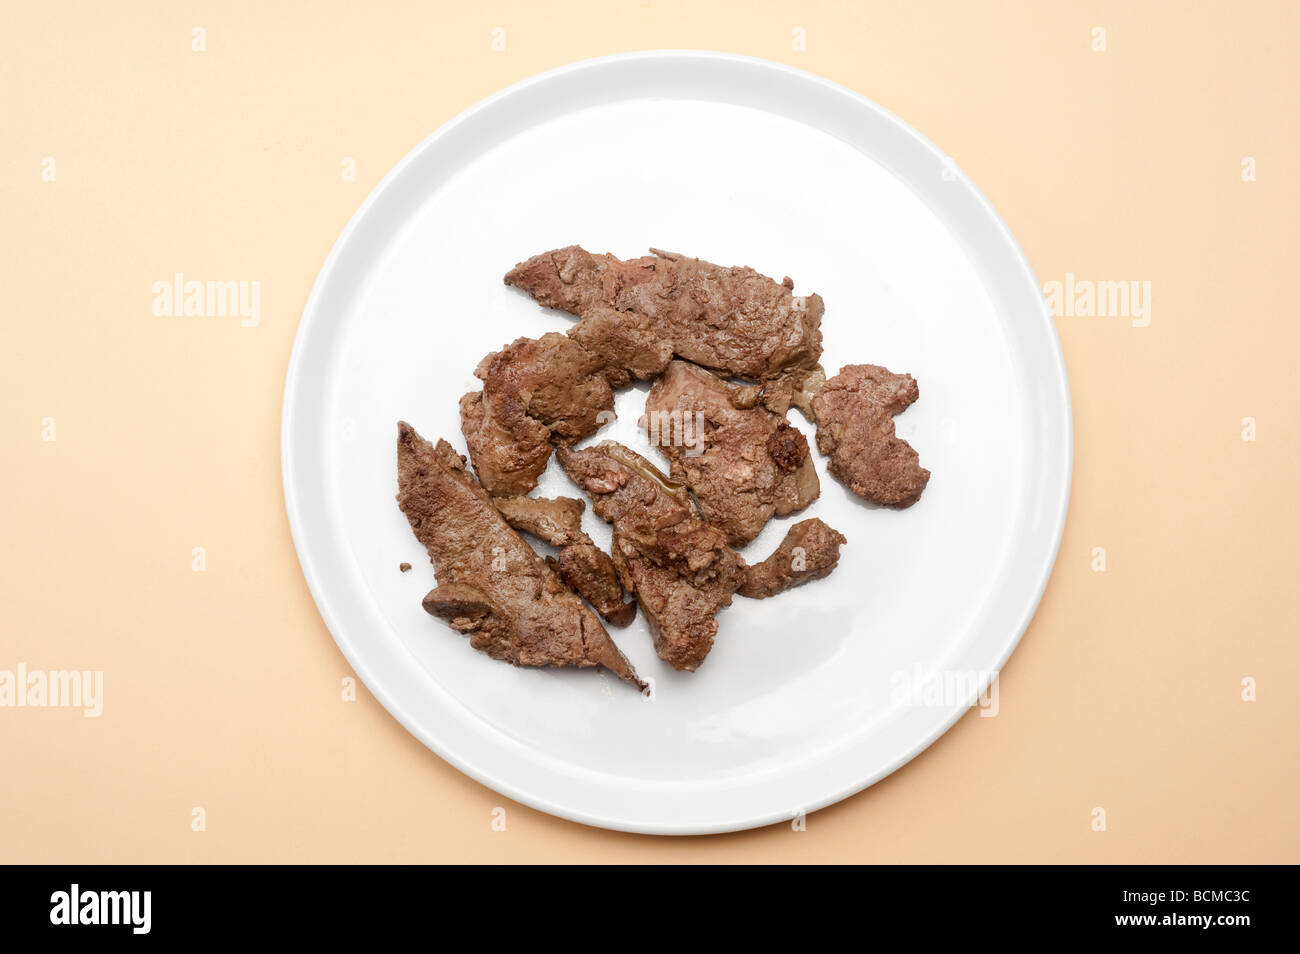 fresh cooked 'lambs liver' on a plain white plate Stock Photo